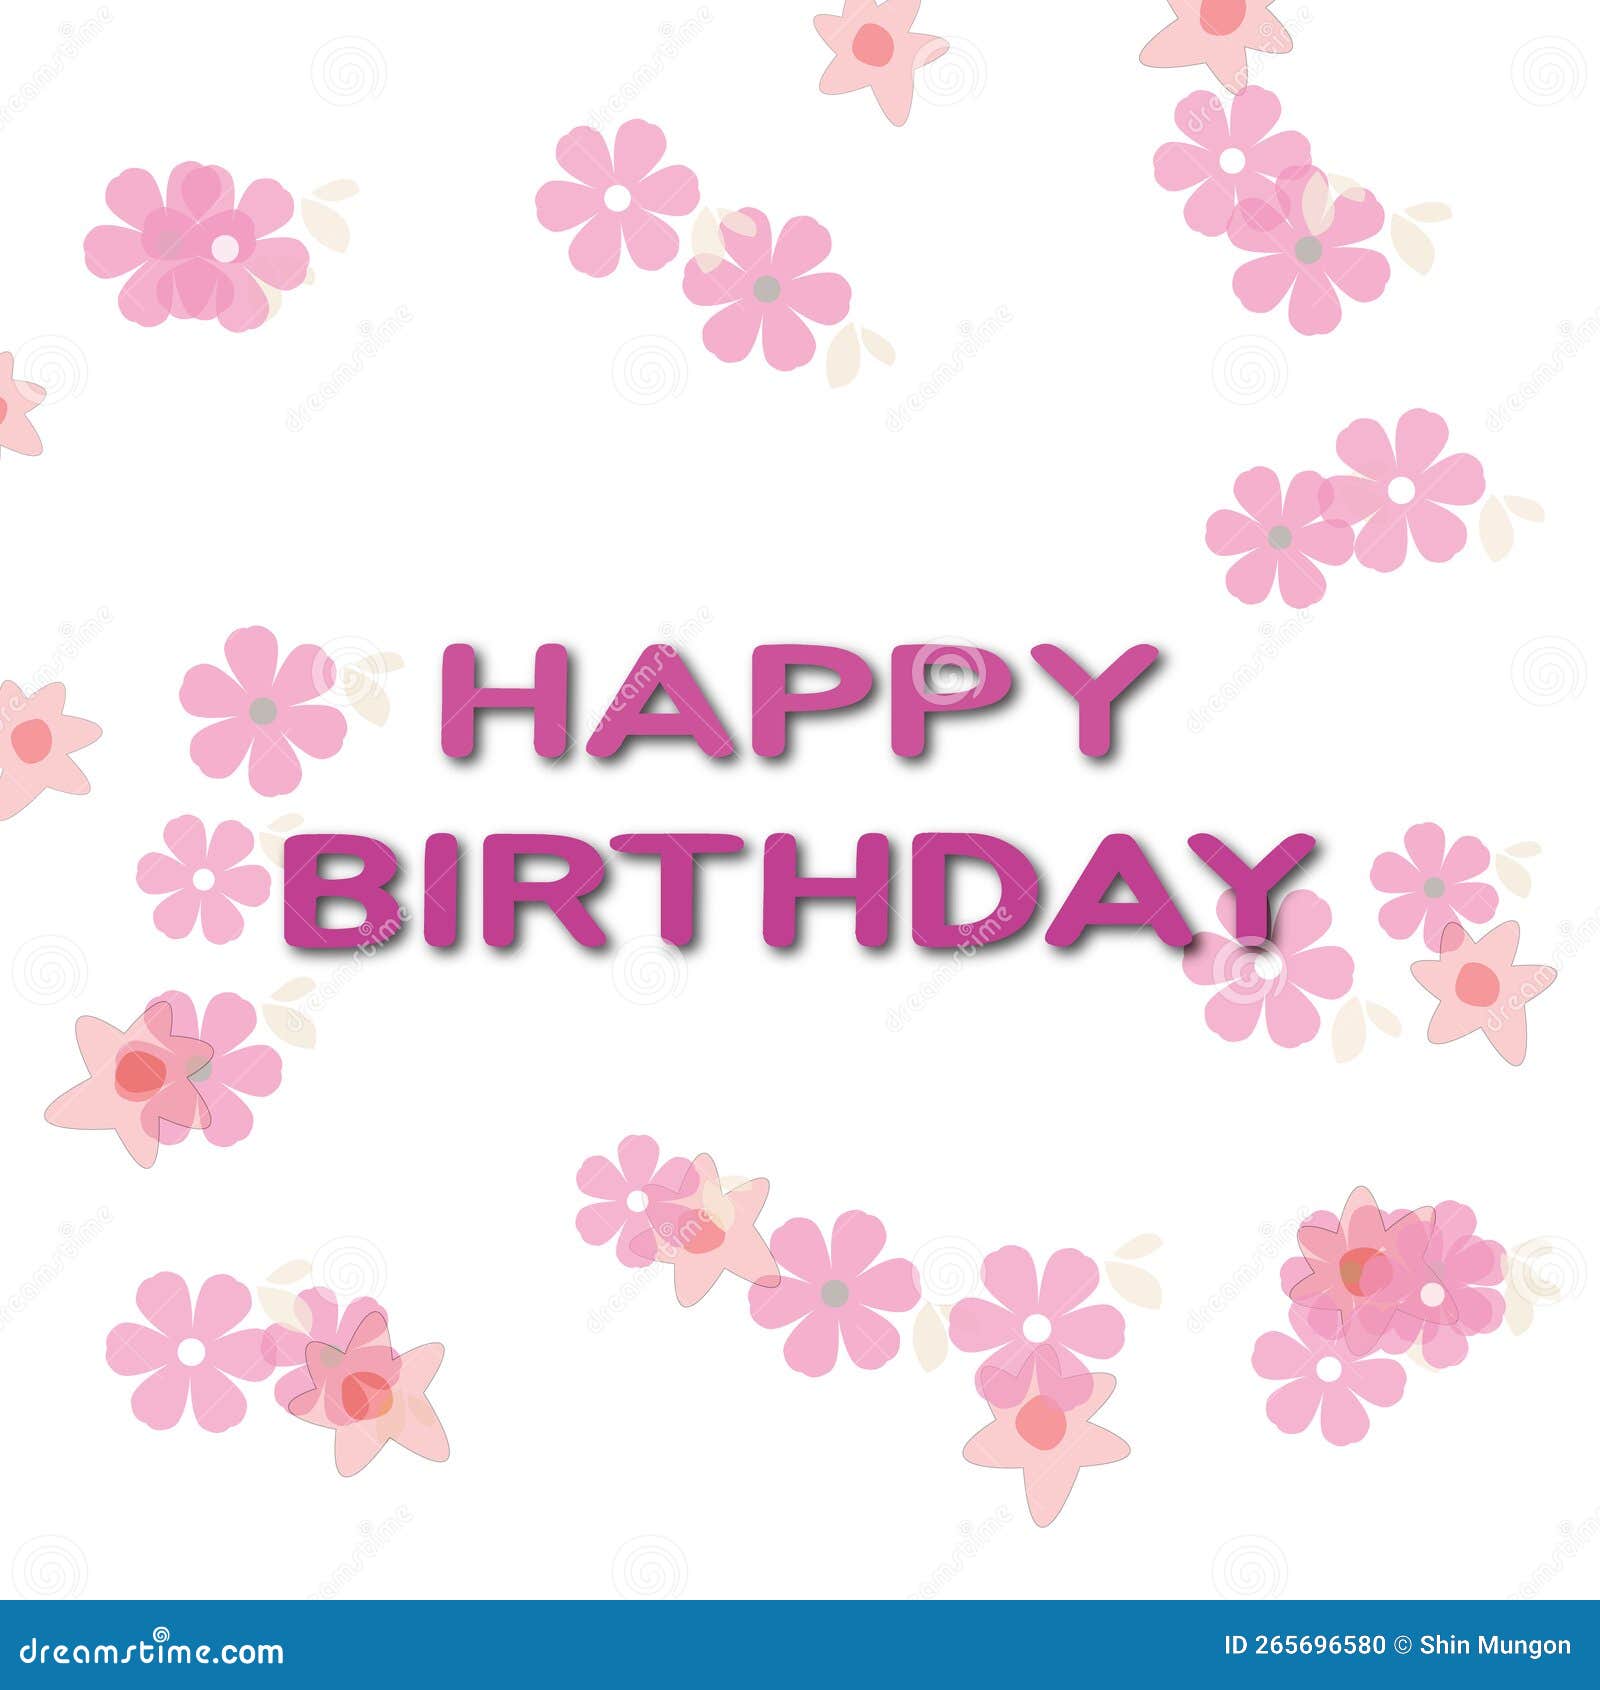 Happy Birthday Message with Various Borders Stock Illustration ...